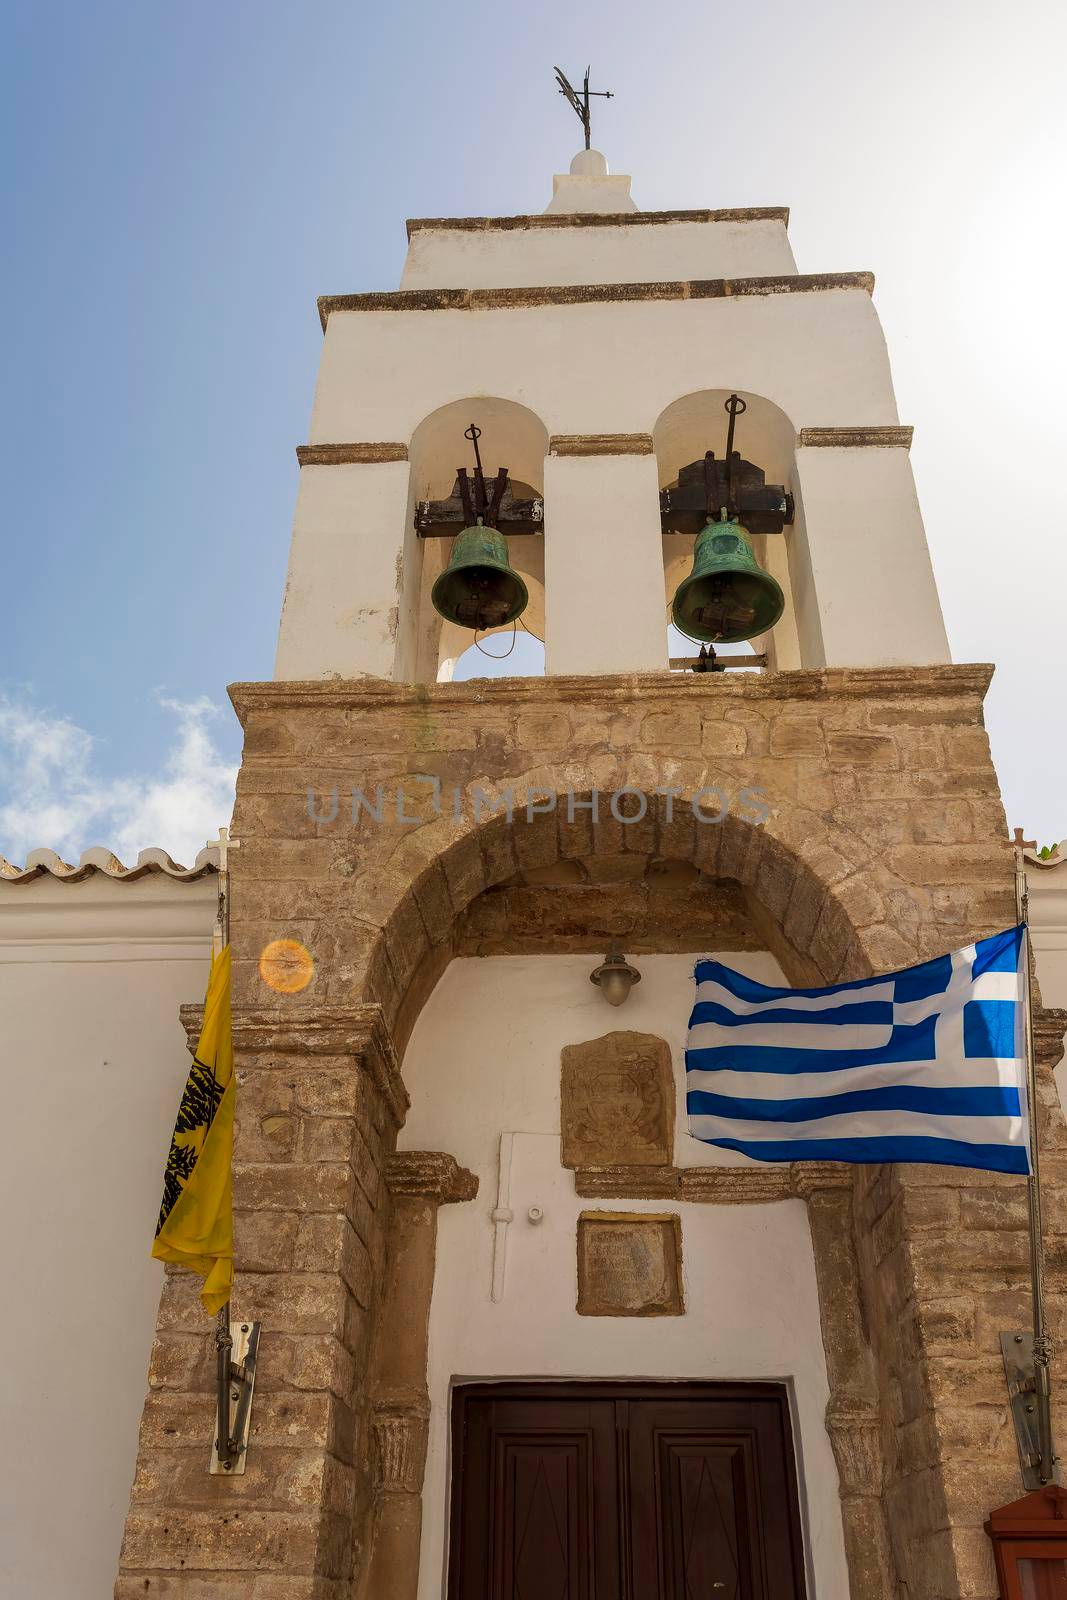 Greek Orthodox church with stone bell tower in the historic traditional settlement of Chora, the capital of Kythira island in Greece.